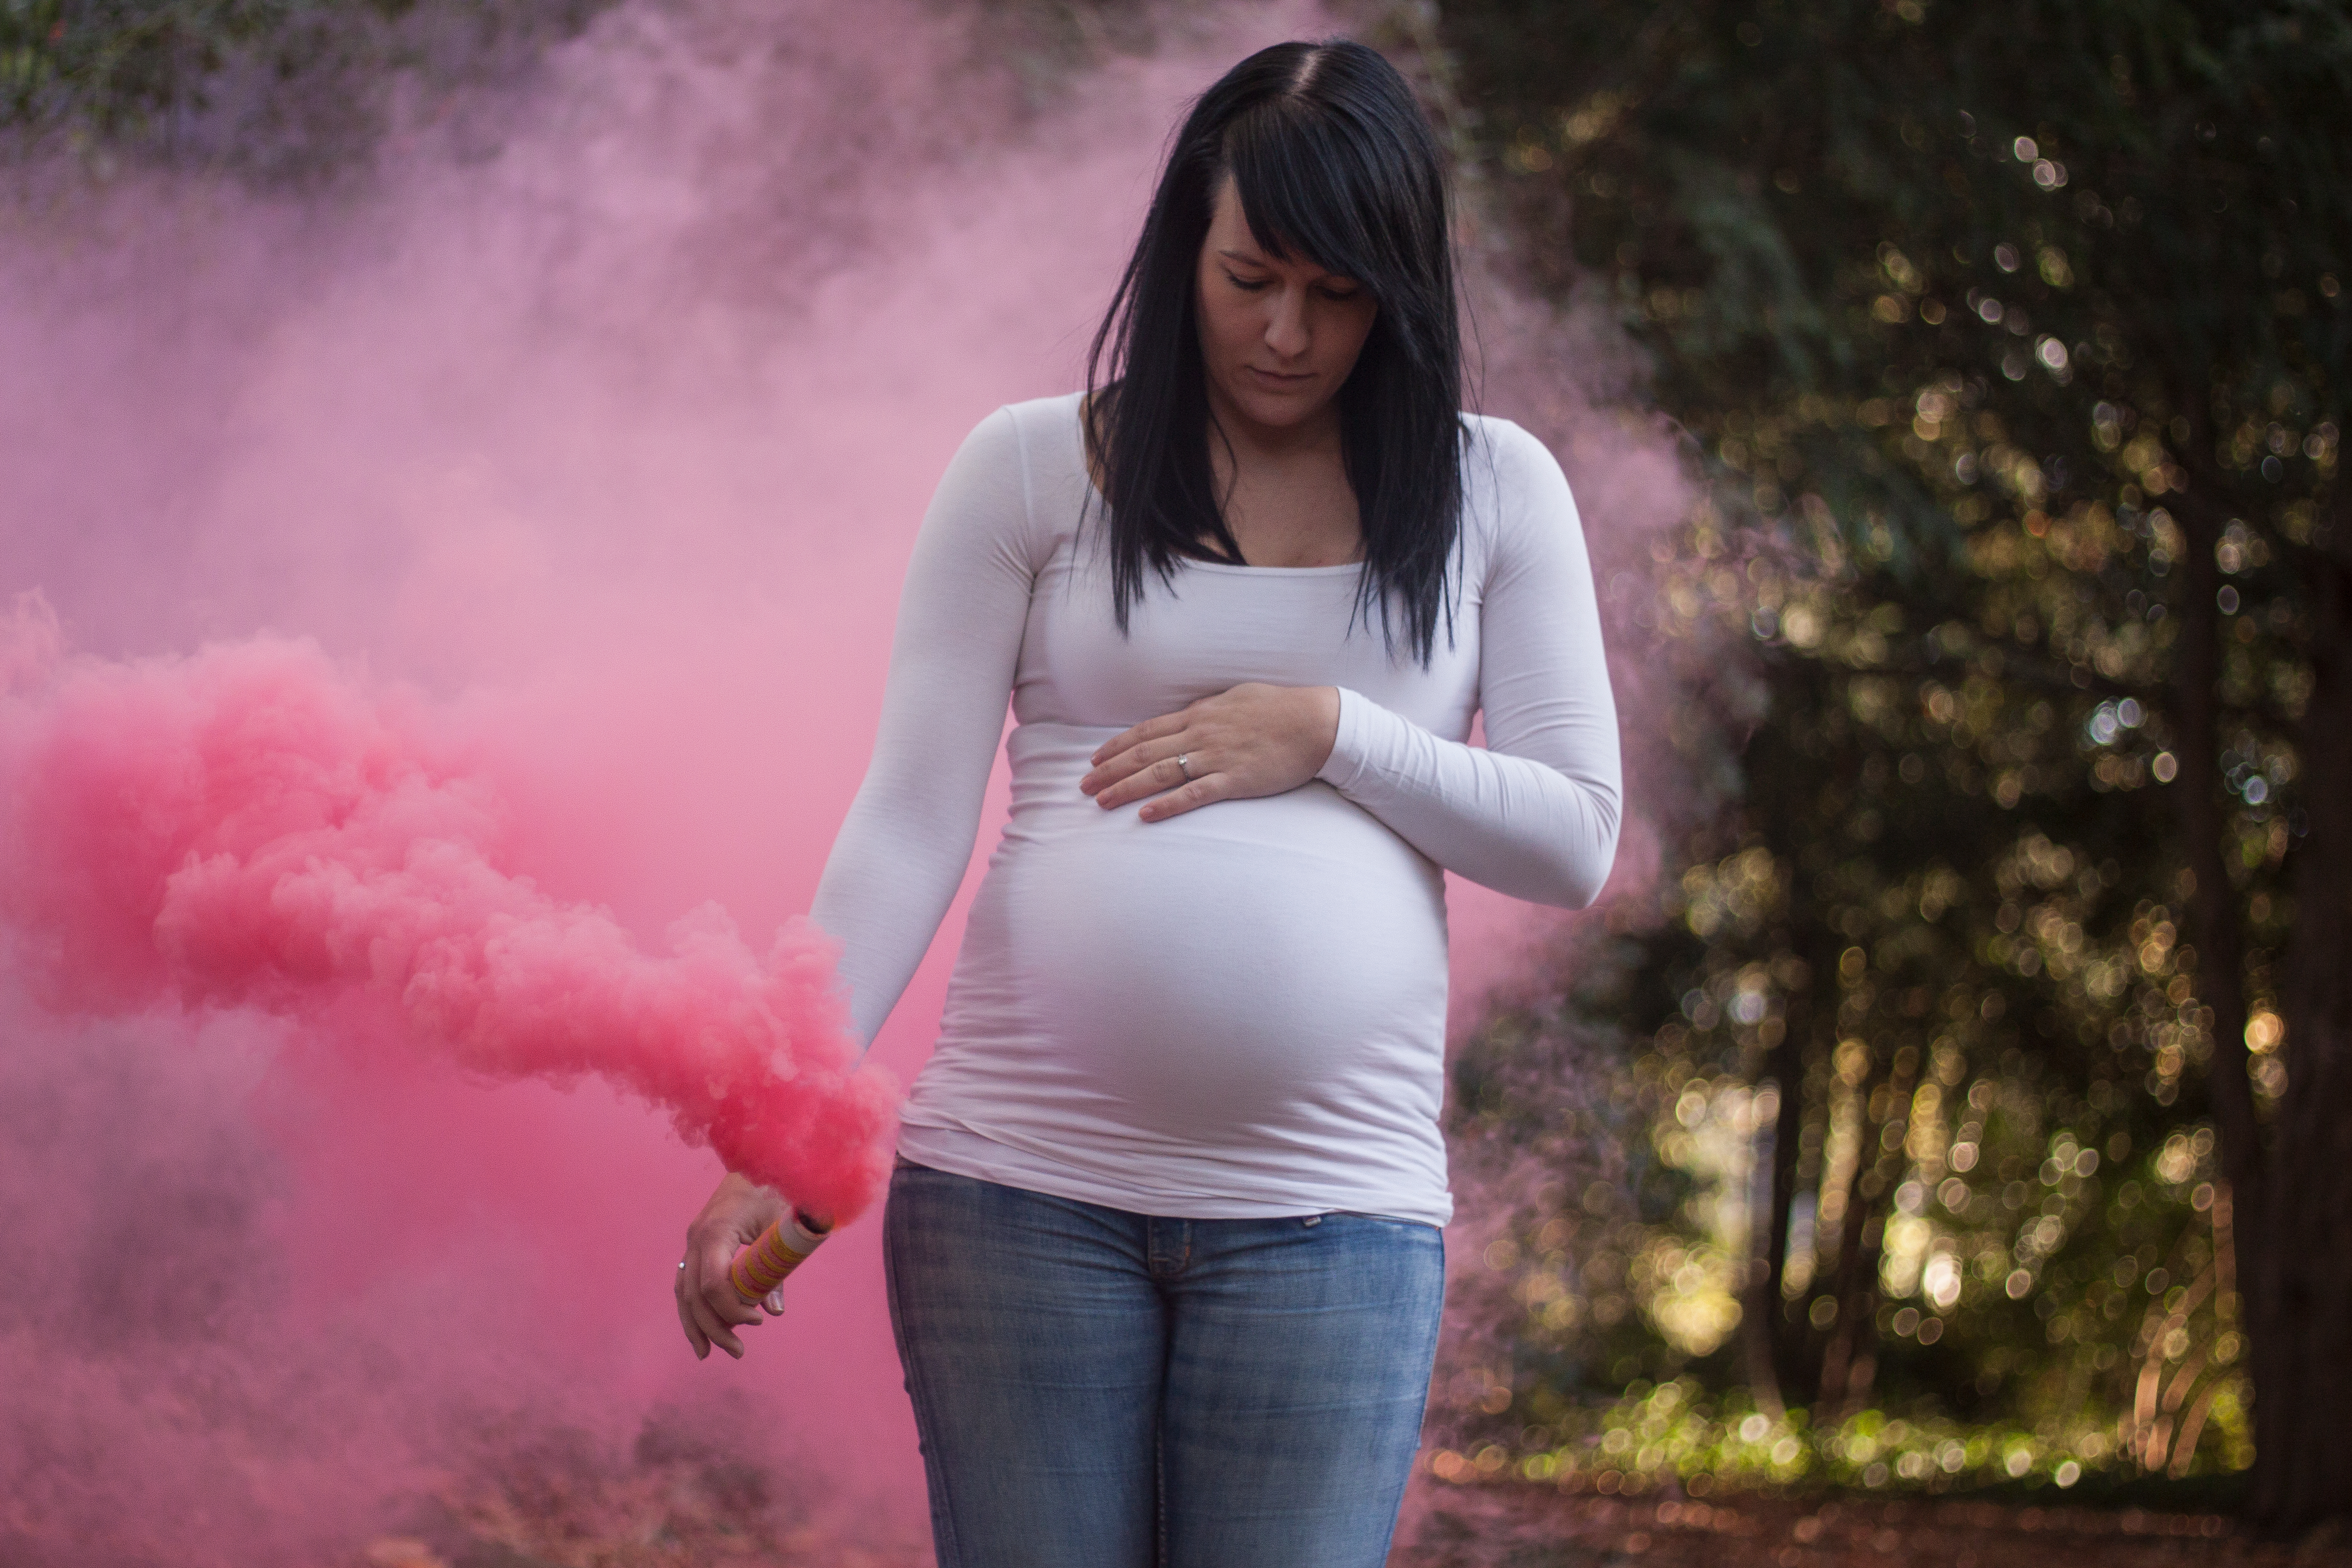 A pregnant woman surrounded by pink smoke | Source: Shutterstock